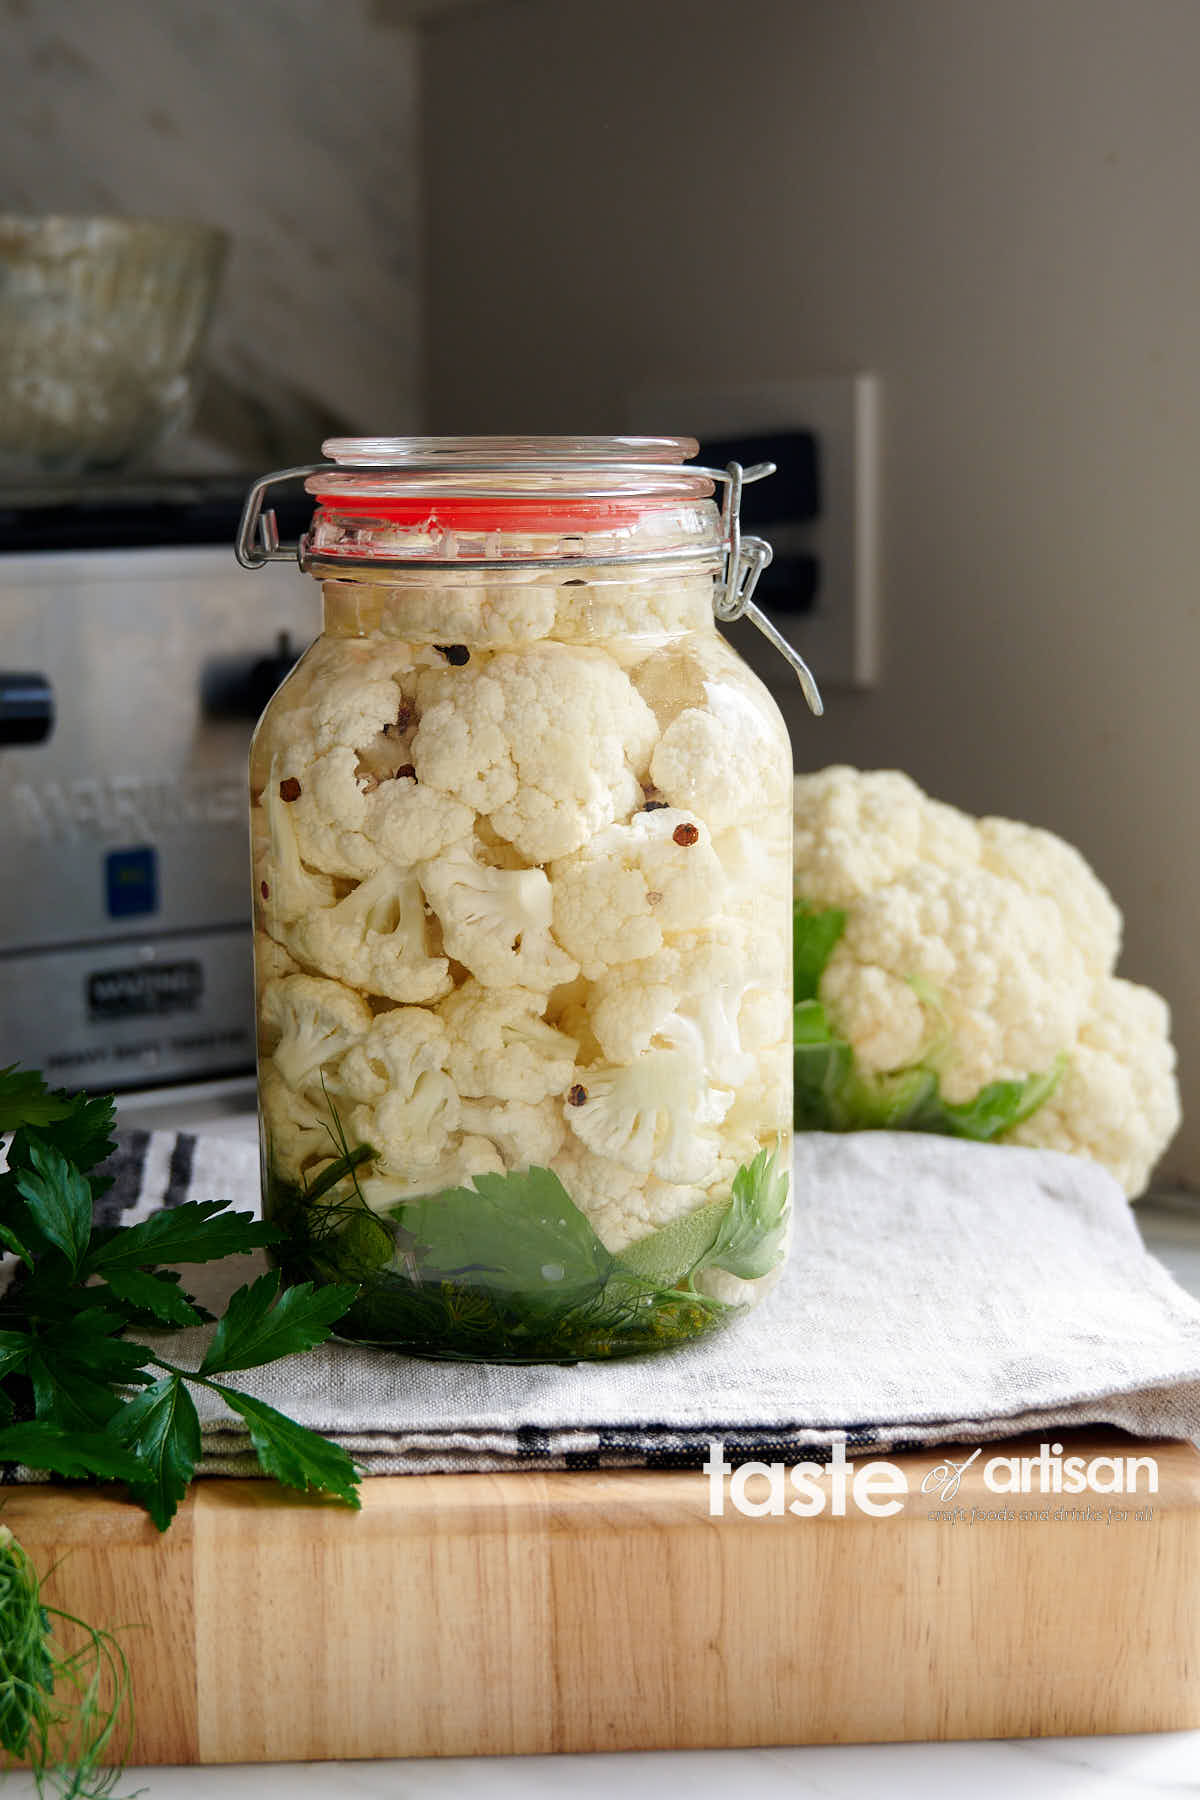 Homemade crunchy pickled cauliflower, made with light sweet adn sour brine that retaines the cauliflower's natural crunch and freshness. It goes so well with heary fall and winter dishes. You can even have it on its own as a snack.